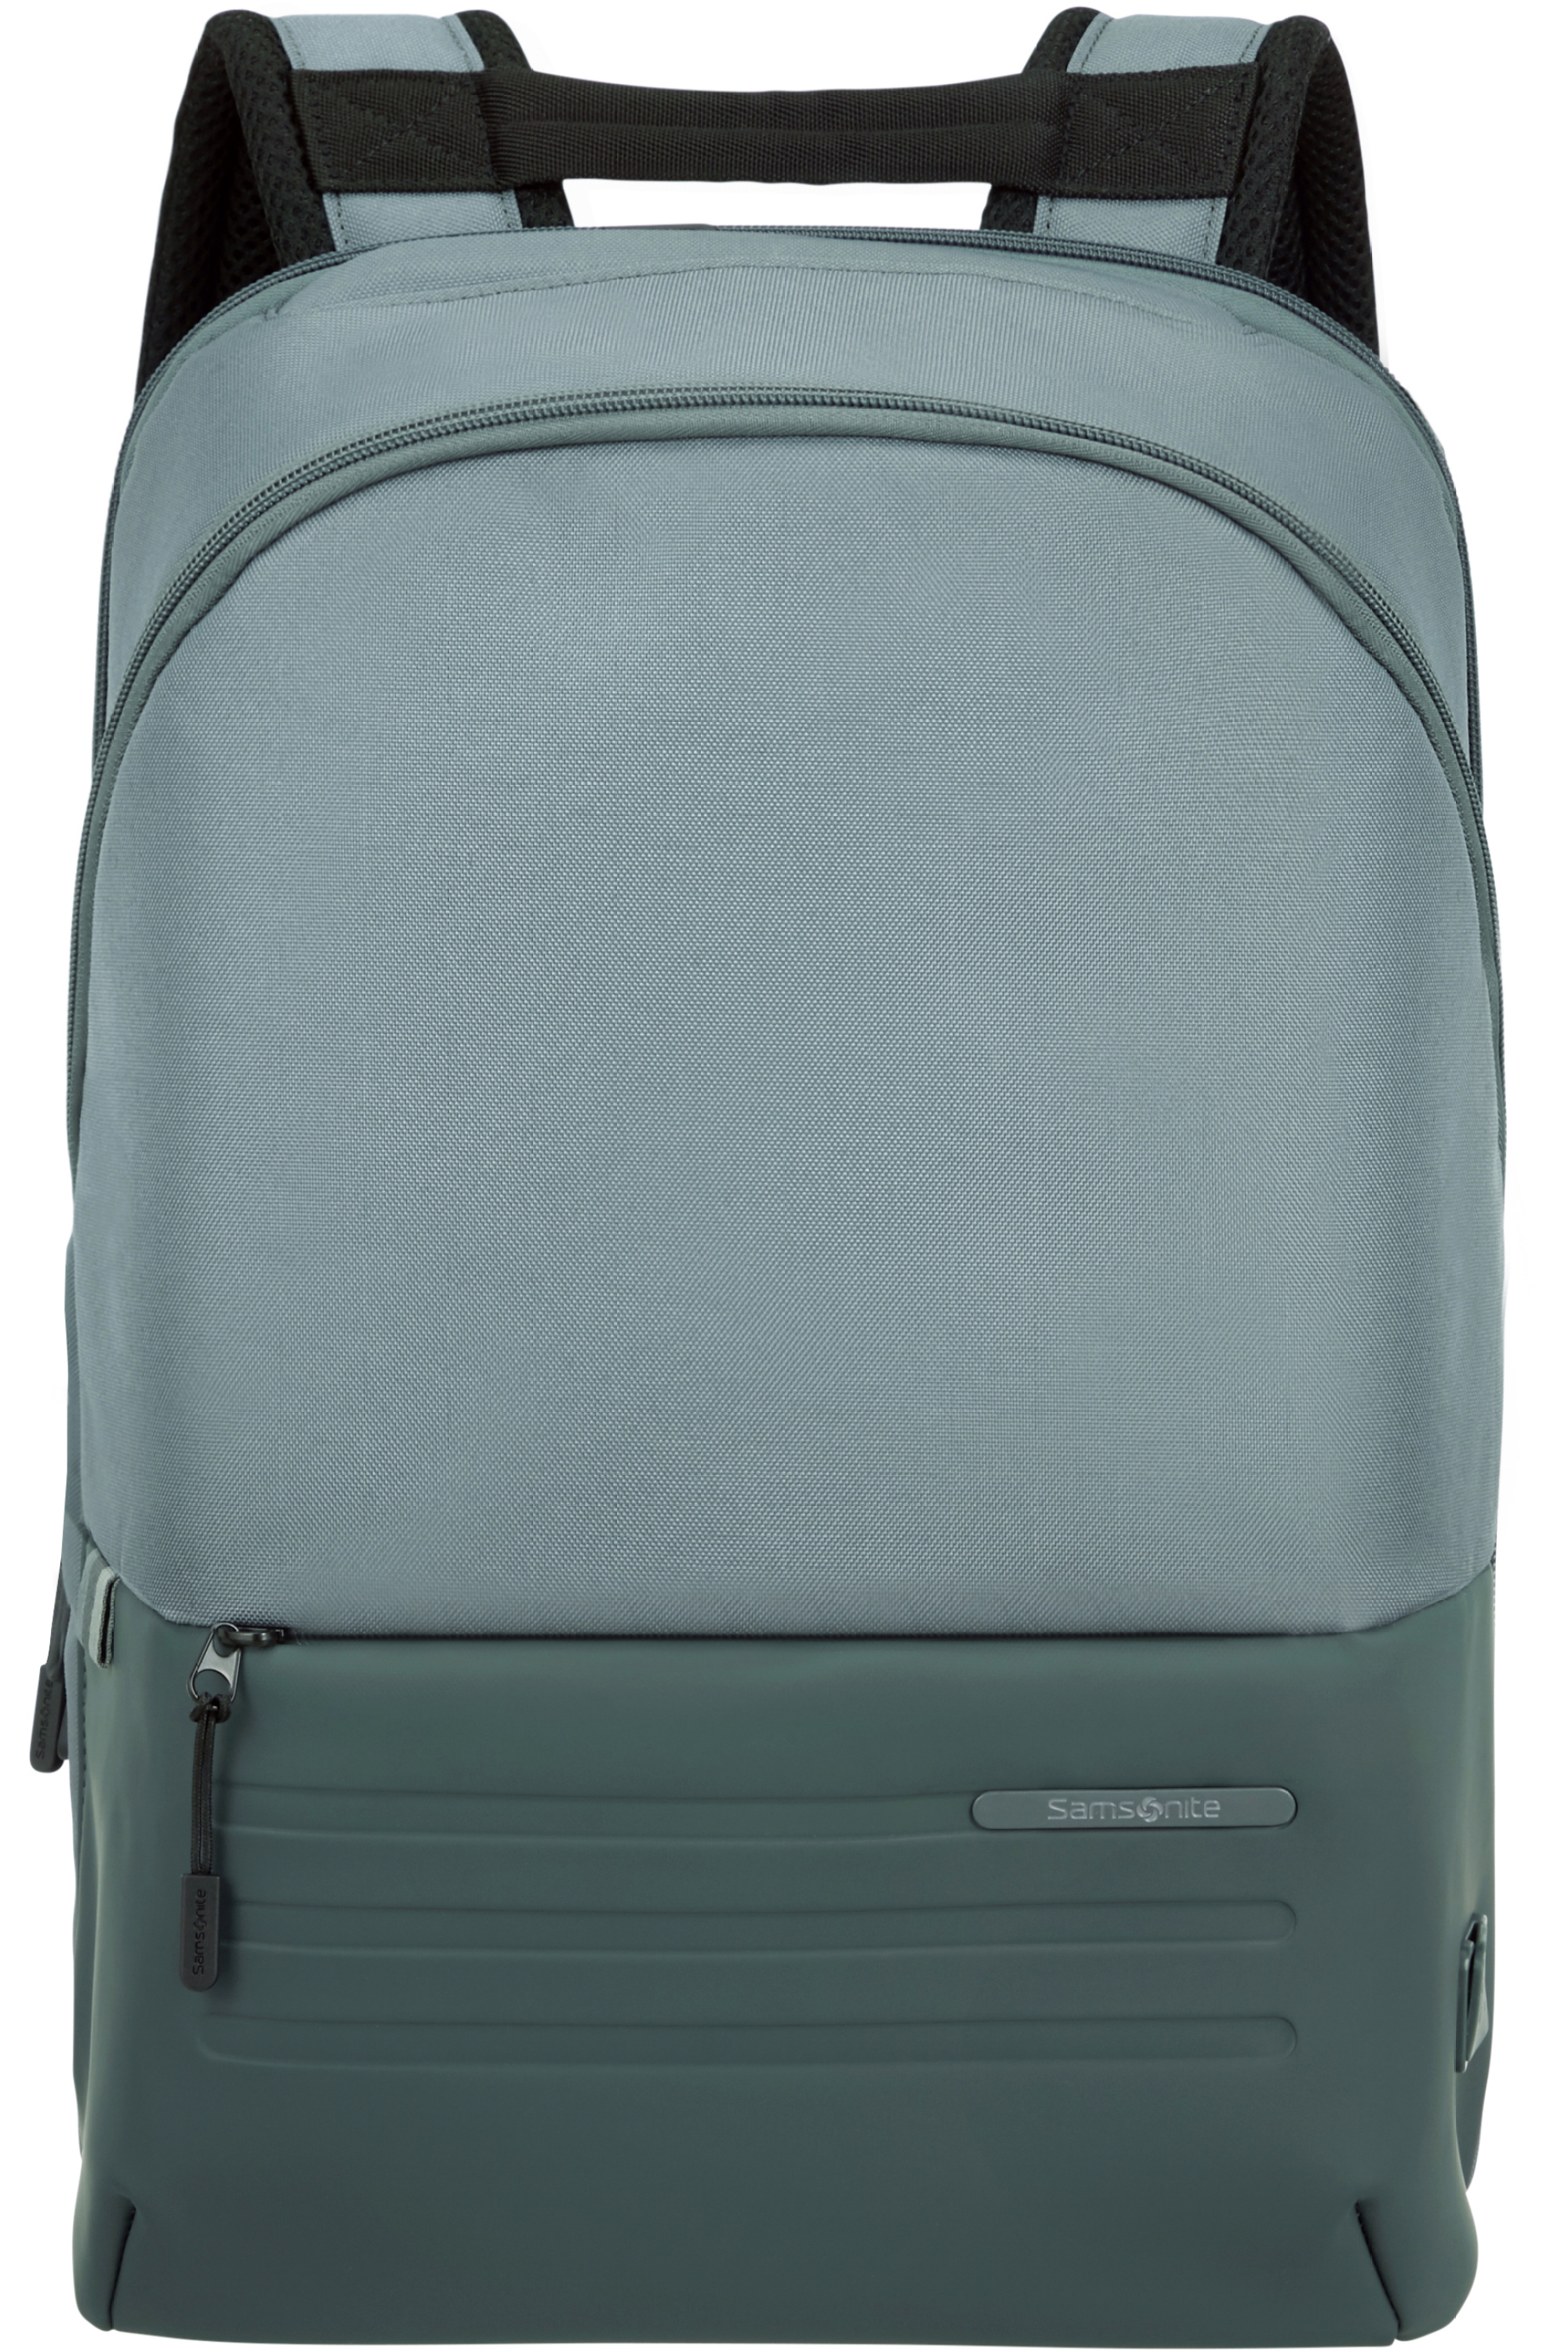 141470-1338-141470_1338_stackd_biz_laptop_backpack_14-1_front-dd2d3e80-4105-4d11-9a46-adb00097672f-png